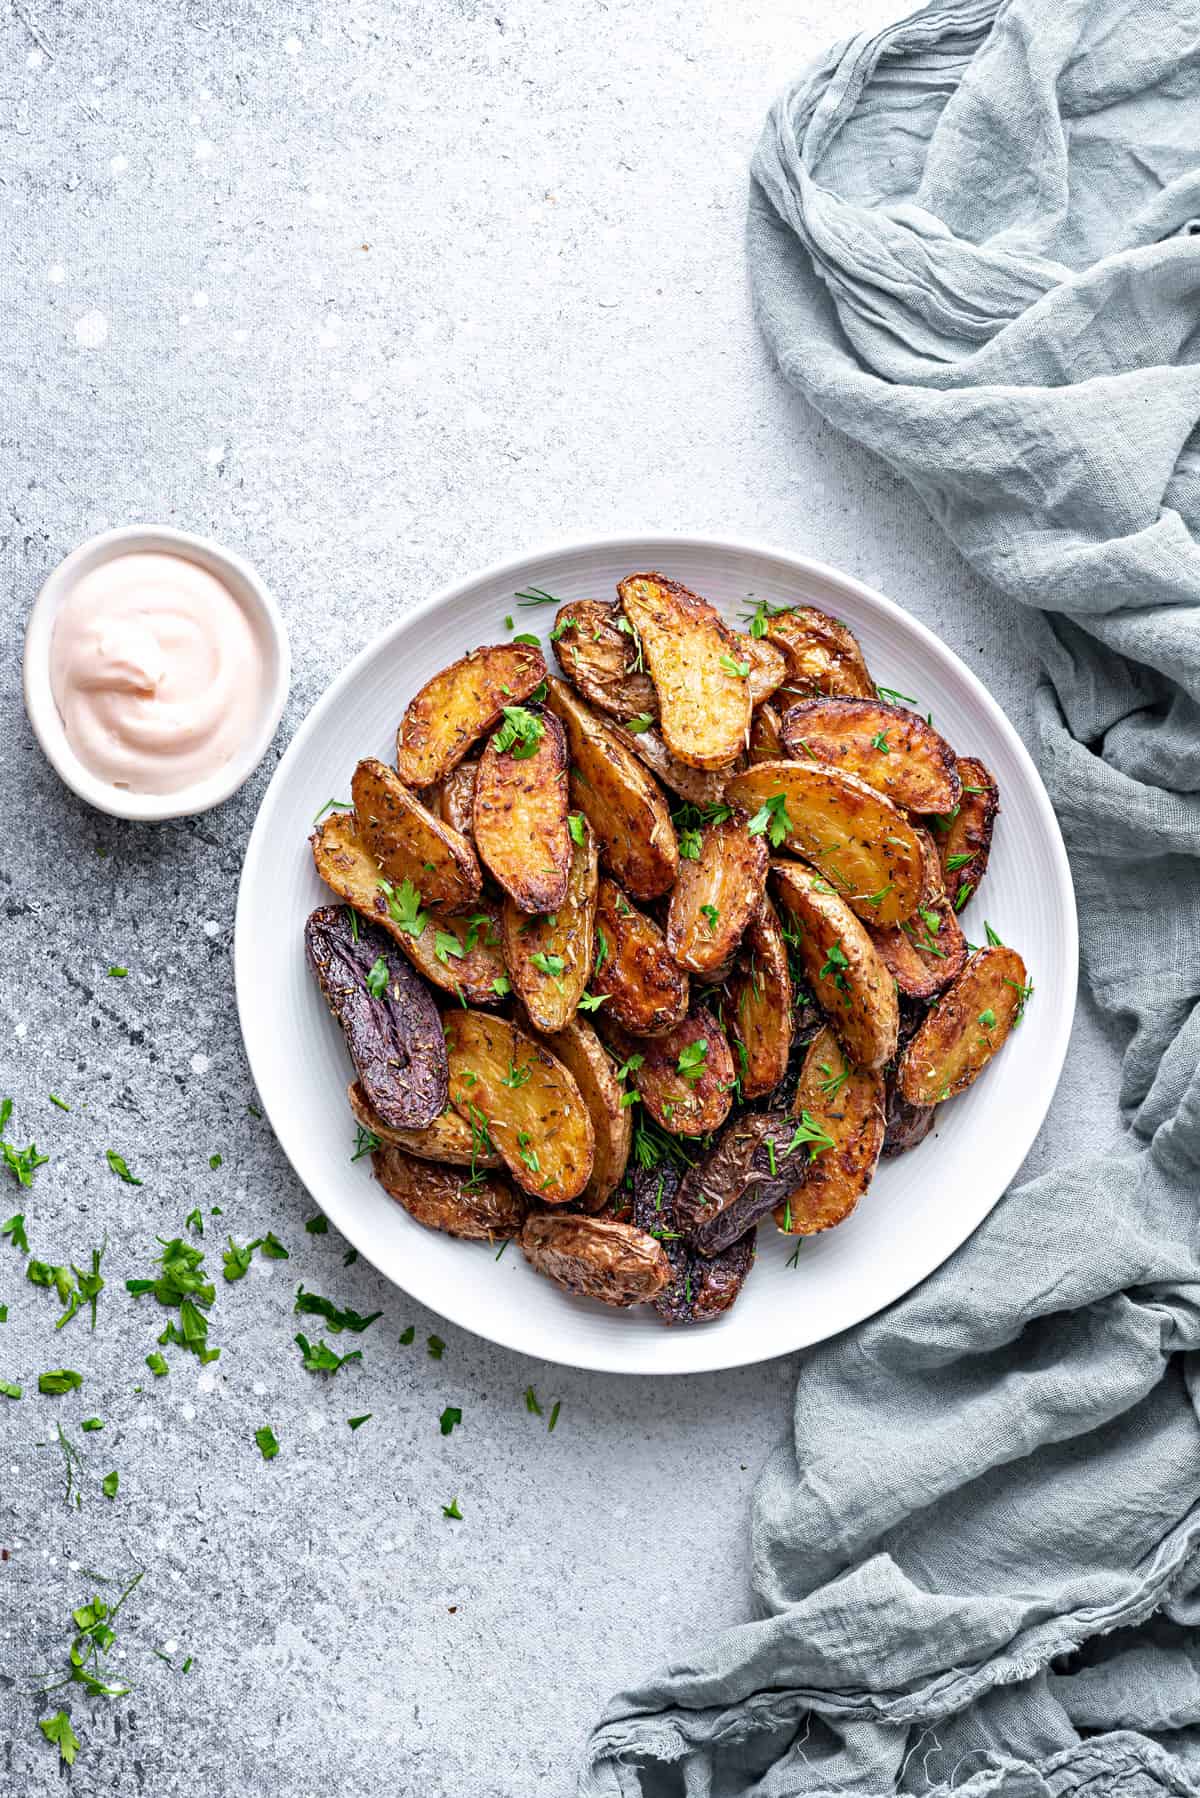 Crisp roasted fingerling potatoes on a plate sprinkled with fresh parsley, dip in bowl on side.